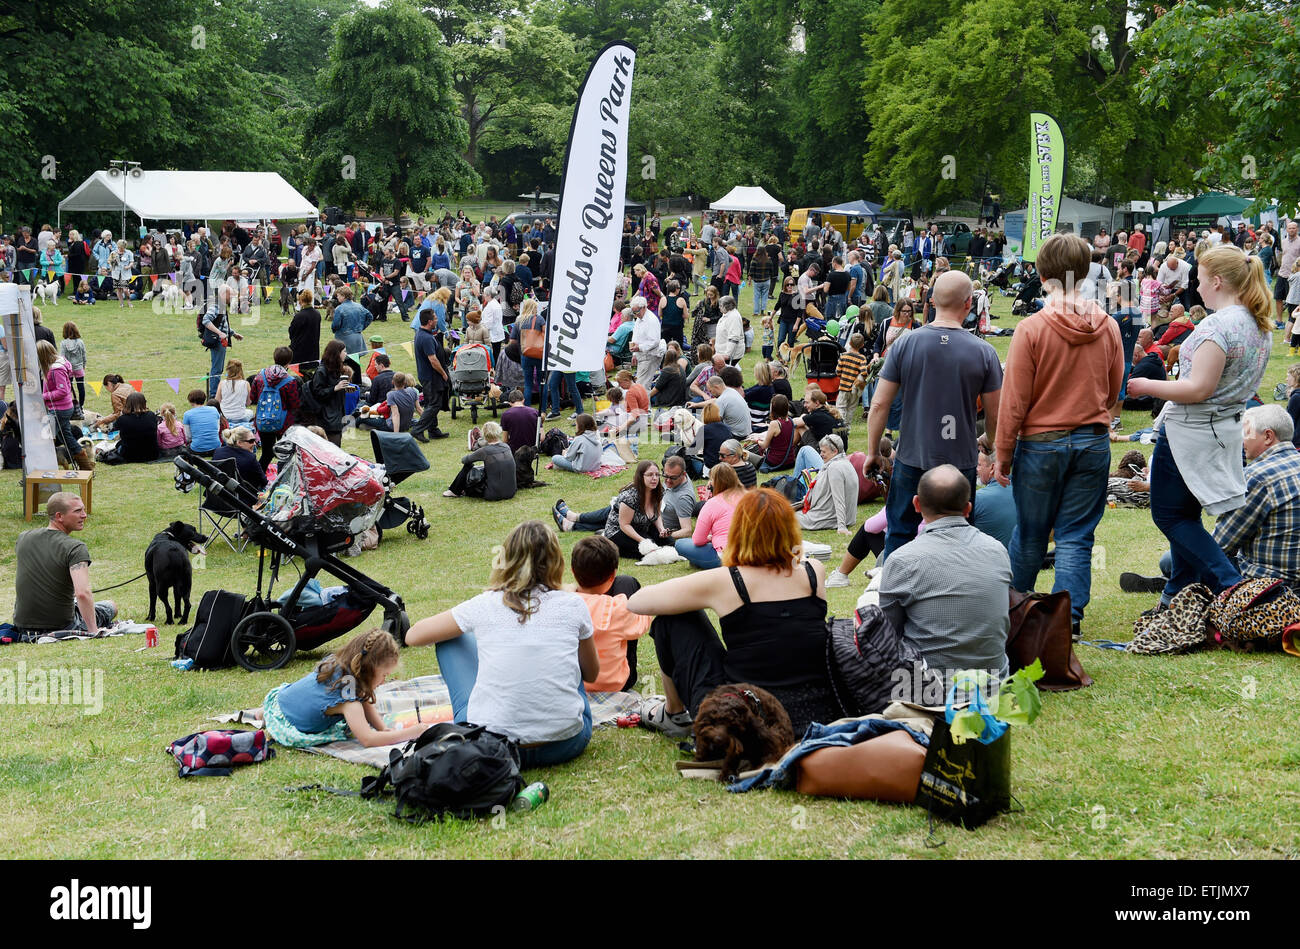 Brighton, UK. 14th June, 2015. Hundreds of dogs and their owners at the annual Bark in the Park Dog Show held at Queens Park in Brighton Stock Photo